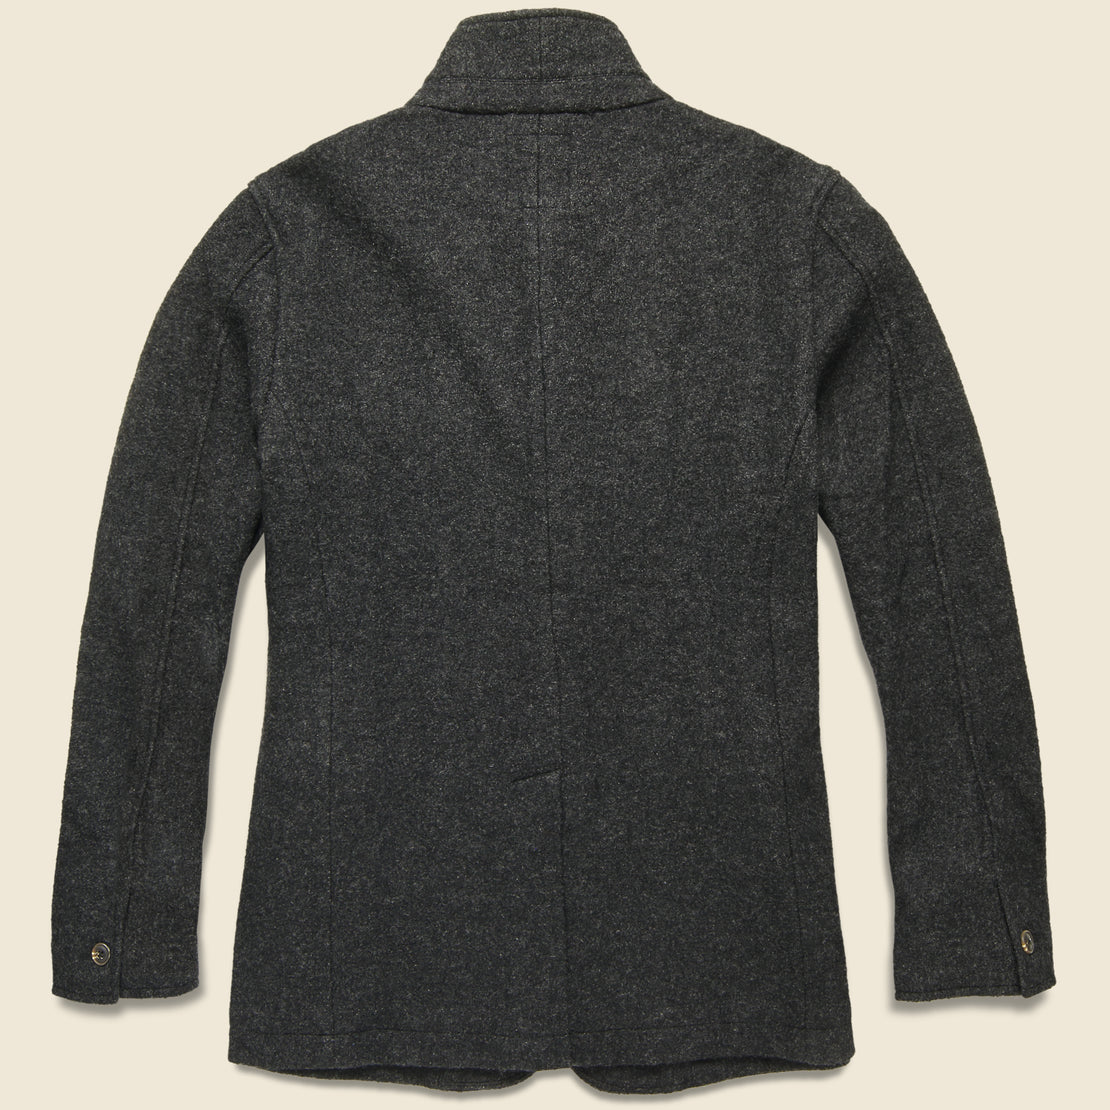 Burnham Knitted Wool Blazer - Charcoal - Grayers - STAG Provisions - Suiting - Sport Coat